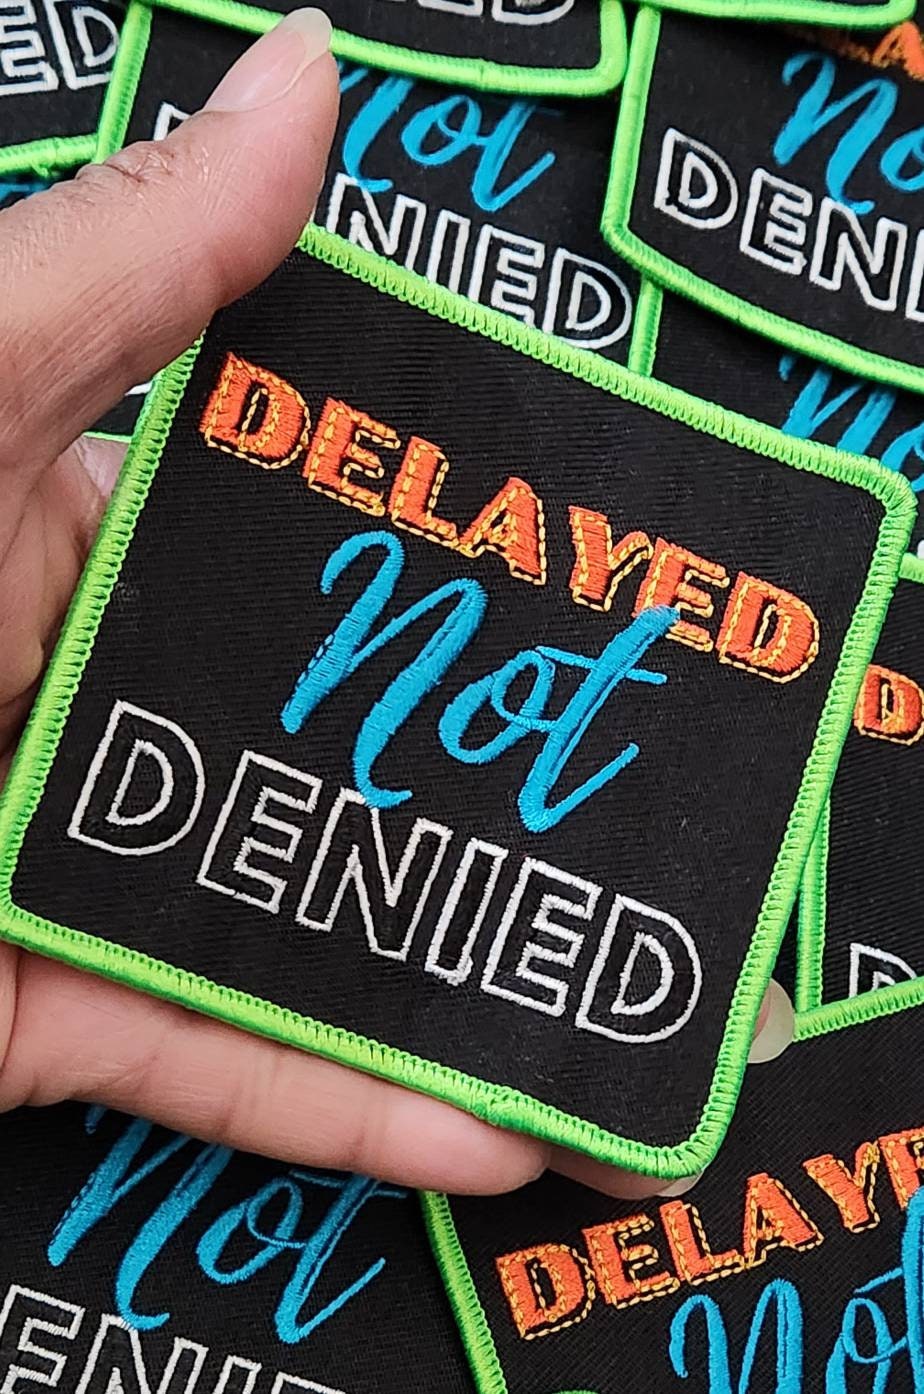 Vibrant 3.5" "Delayed Not Denied" 1-pc, Iron-On Embroidered Patch w/Colorful Design, Spiritual Patches for Clothing and Hats